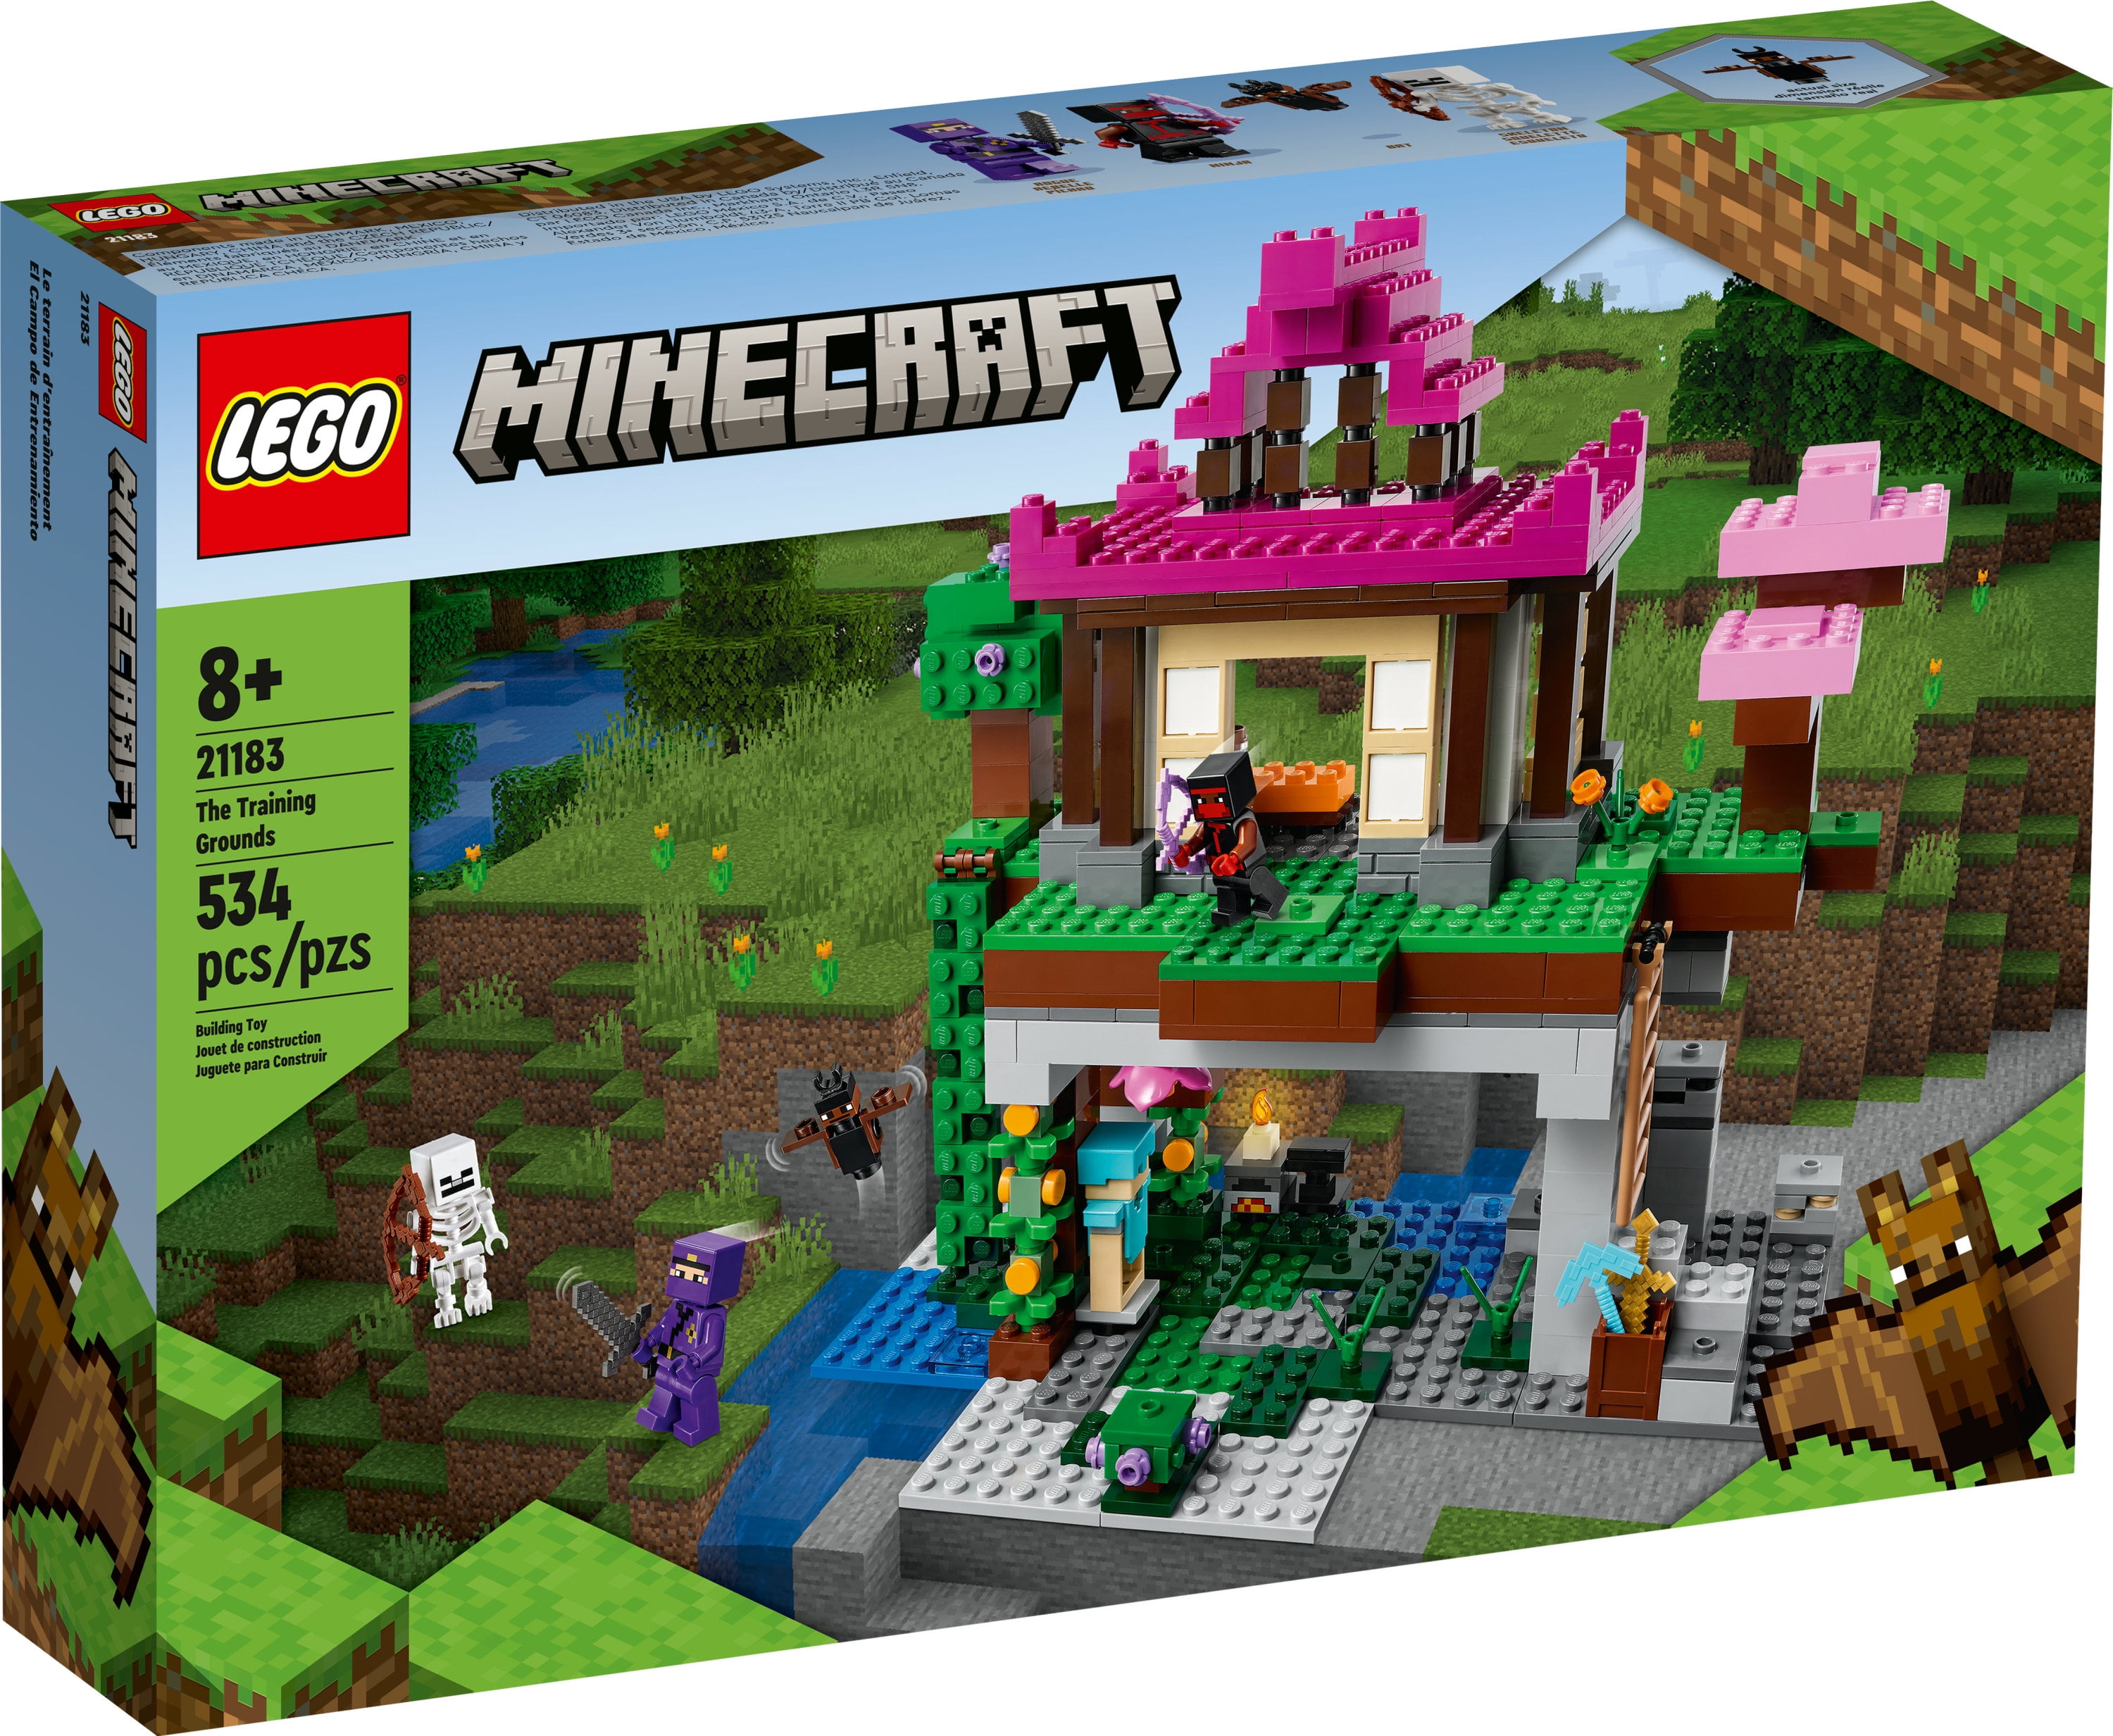 piedestal bille Bage LEGO Minecraft The Training Grounds House Building Set, 21183 Cave Toy,  Gifts for Kids, Boys and Girls with Skeleton, Ninja, Rogue and Bat Figures  - Walmart.com